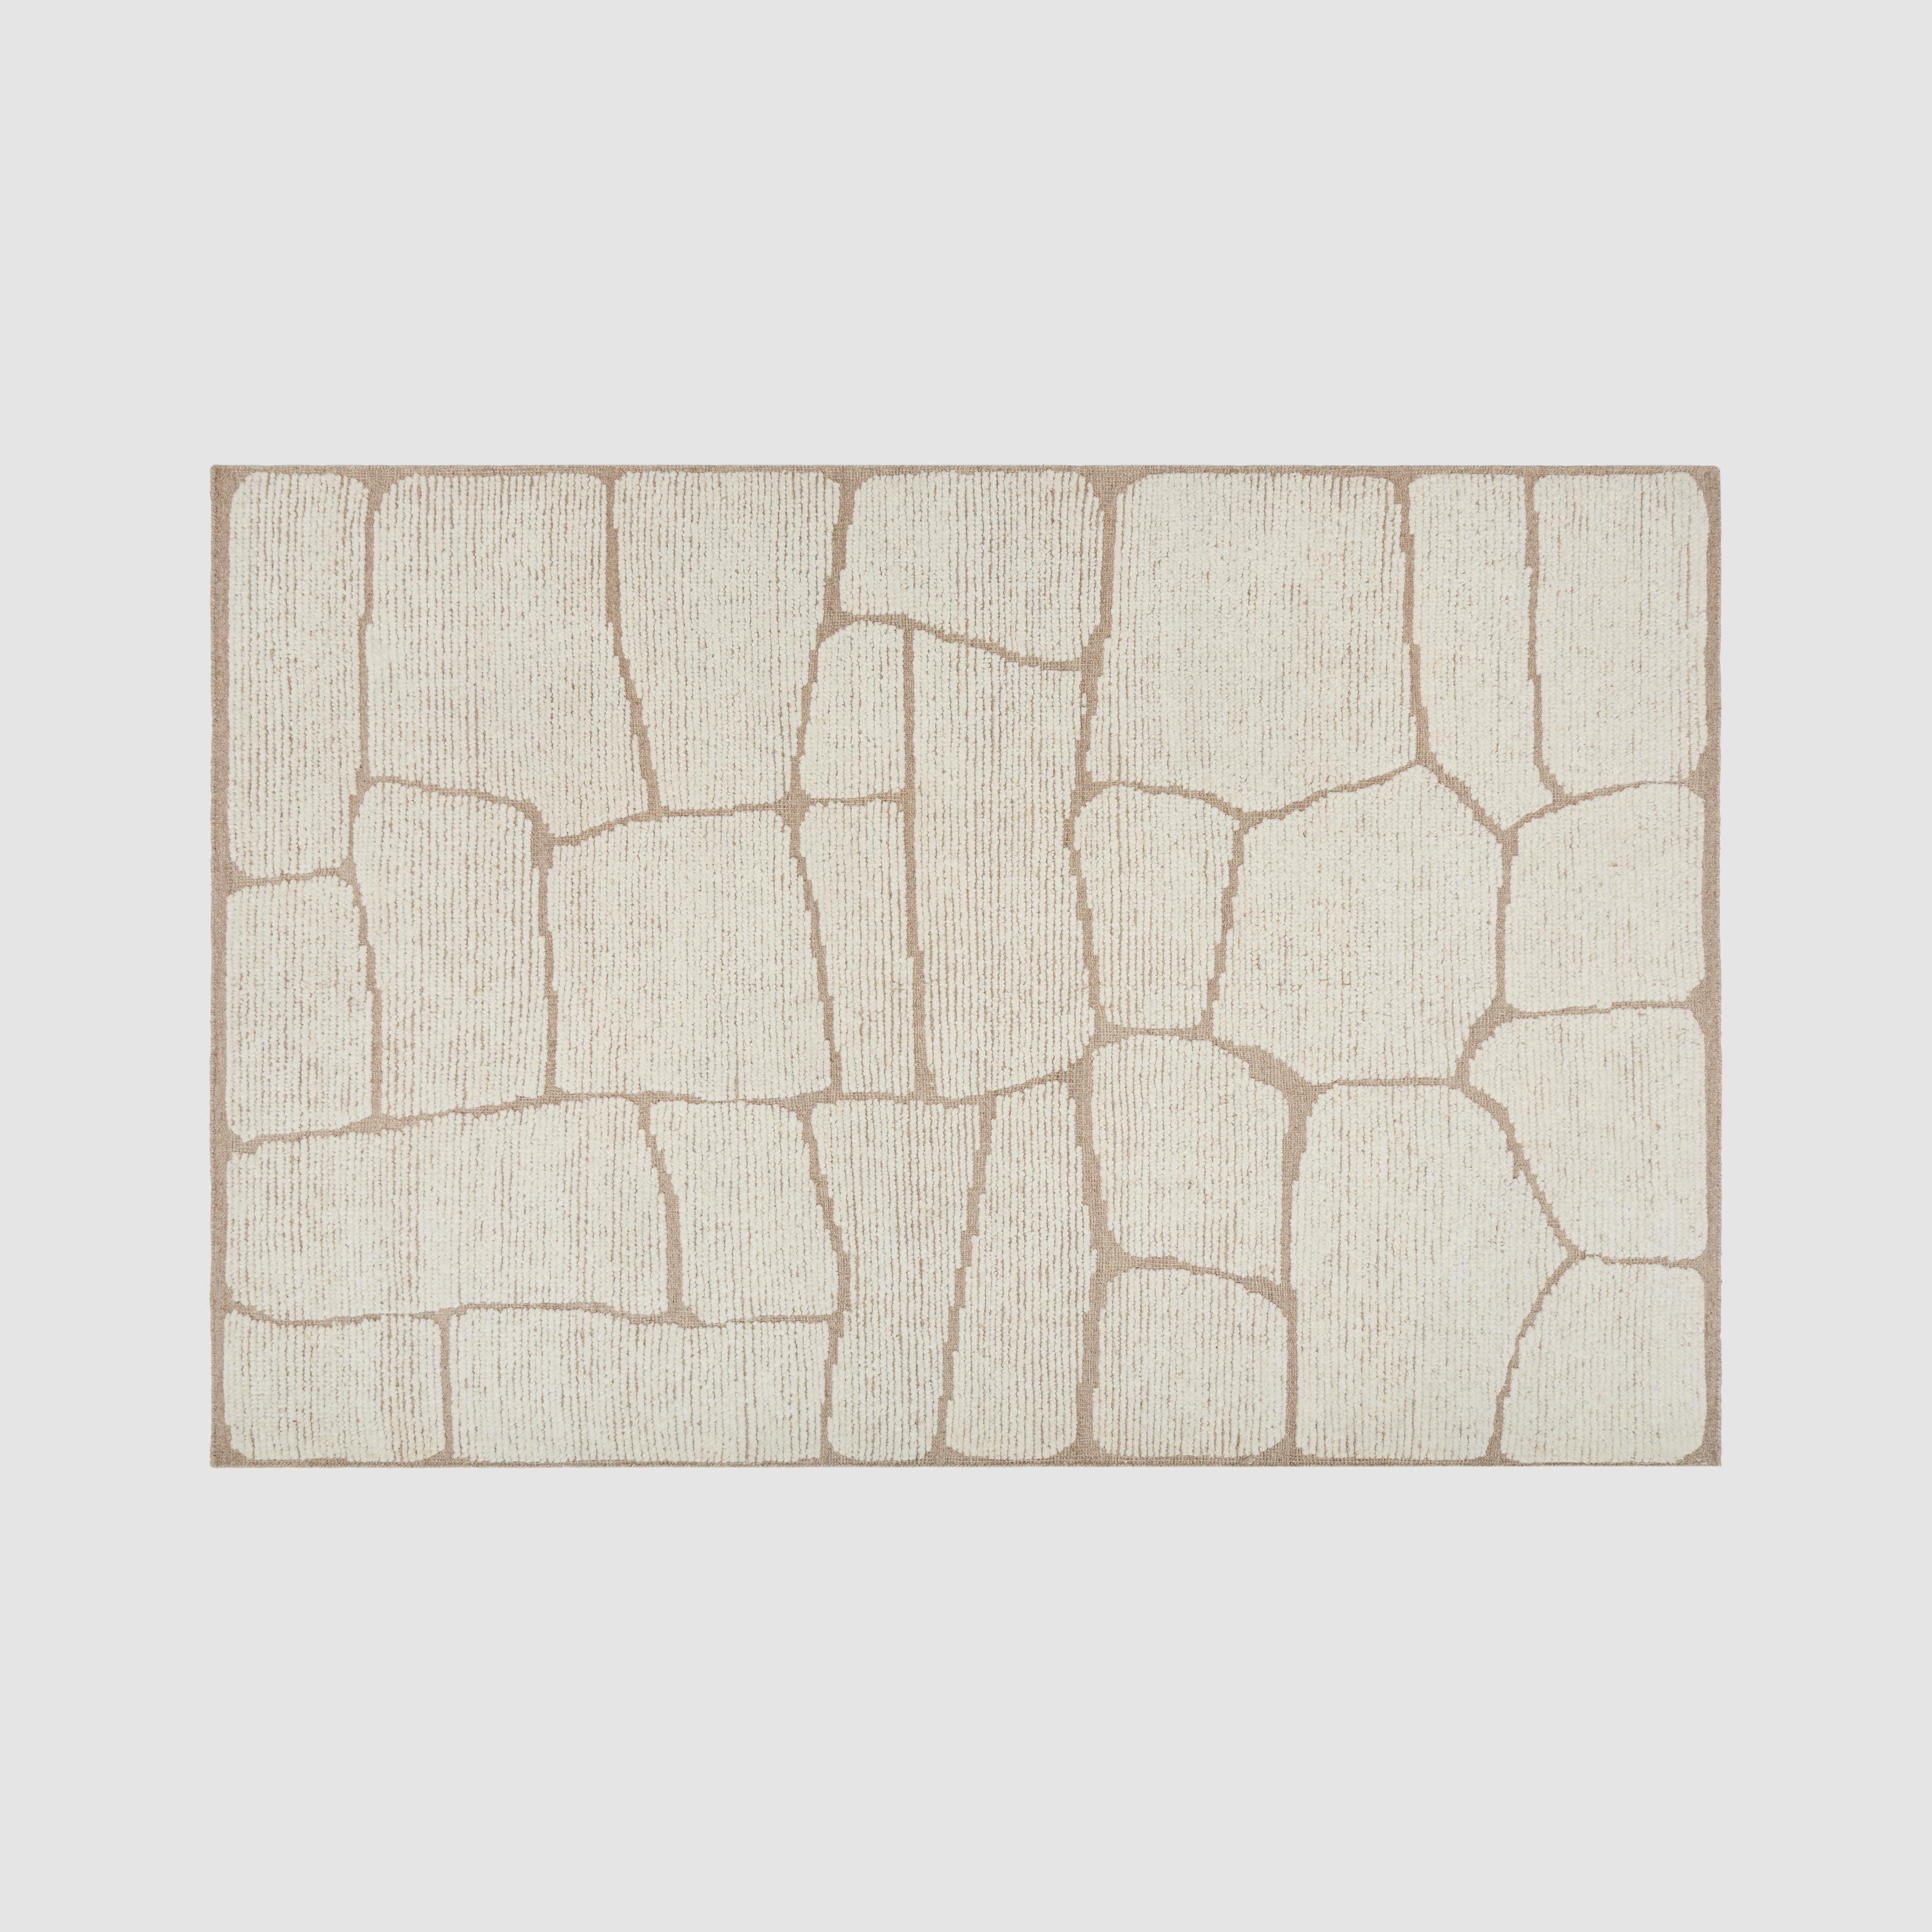 The Citizenry Rajani Hand-Knotted Area Rug | 6' x 9' - Image 3